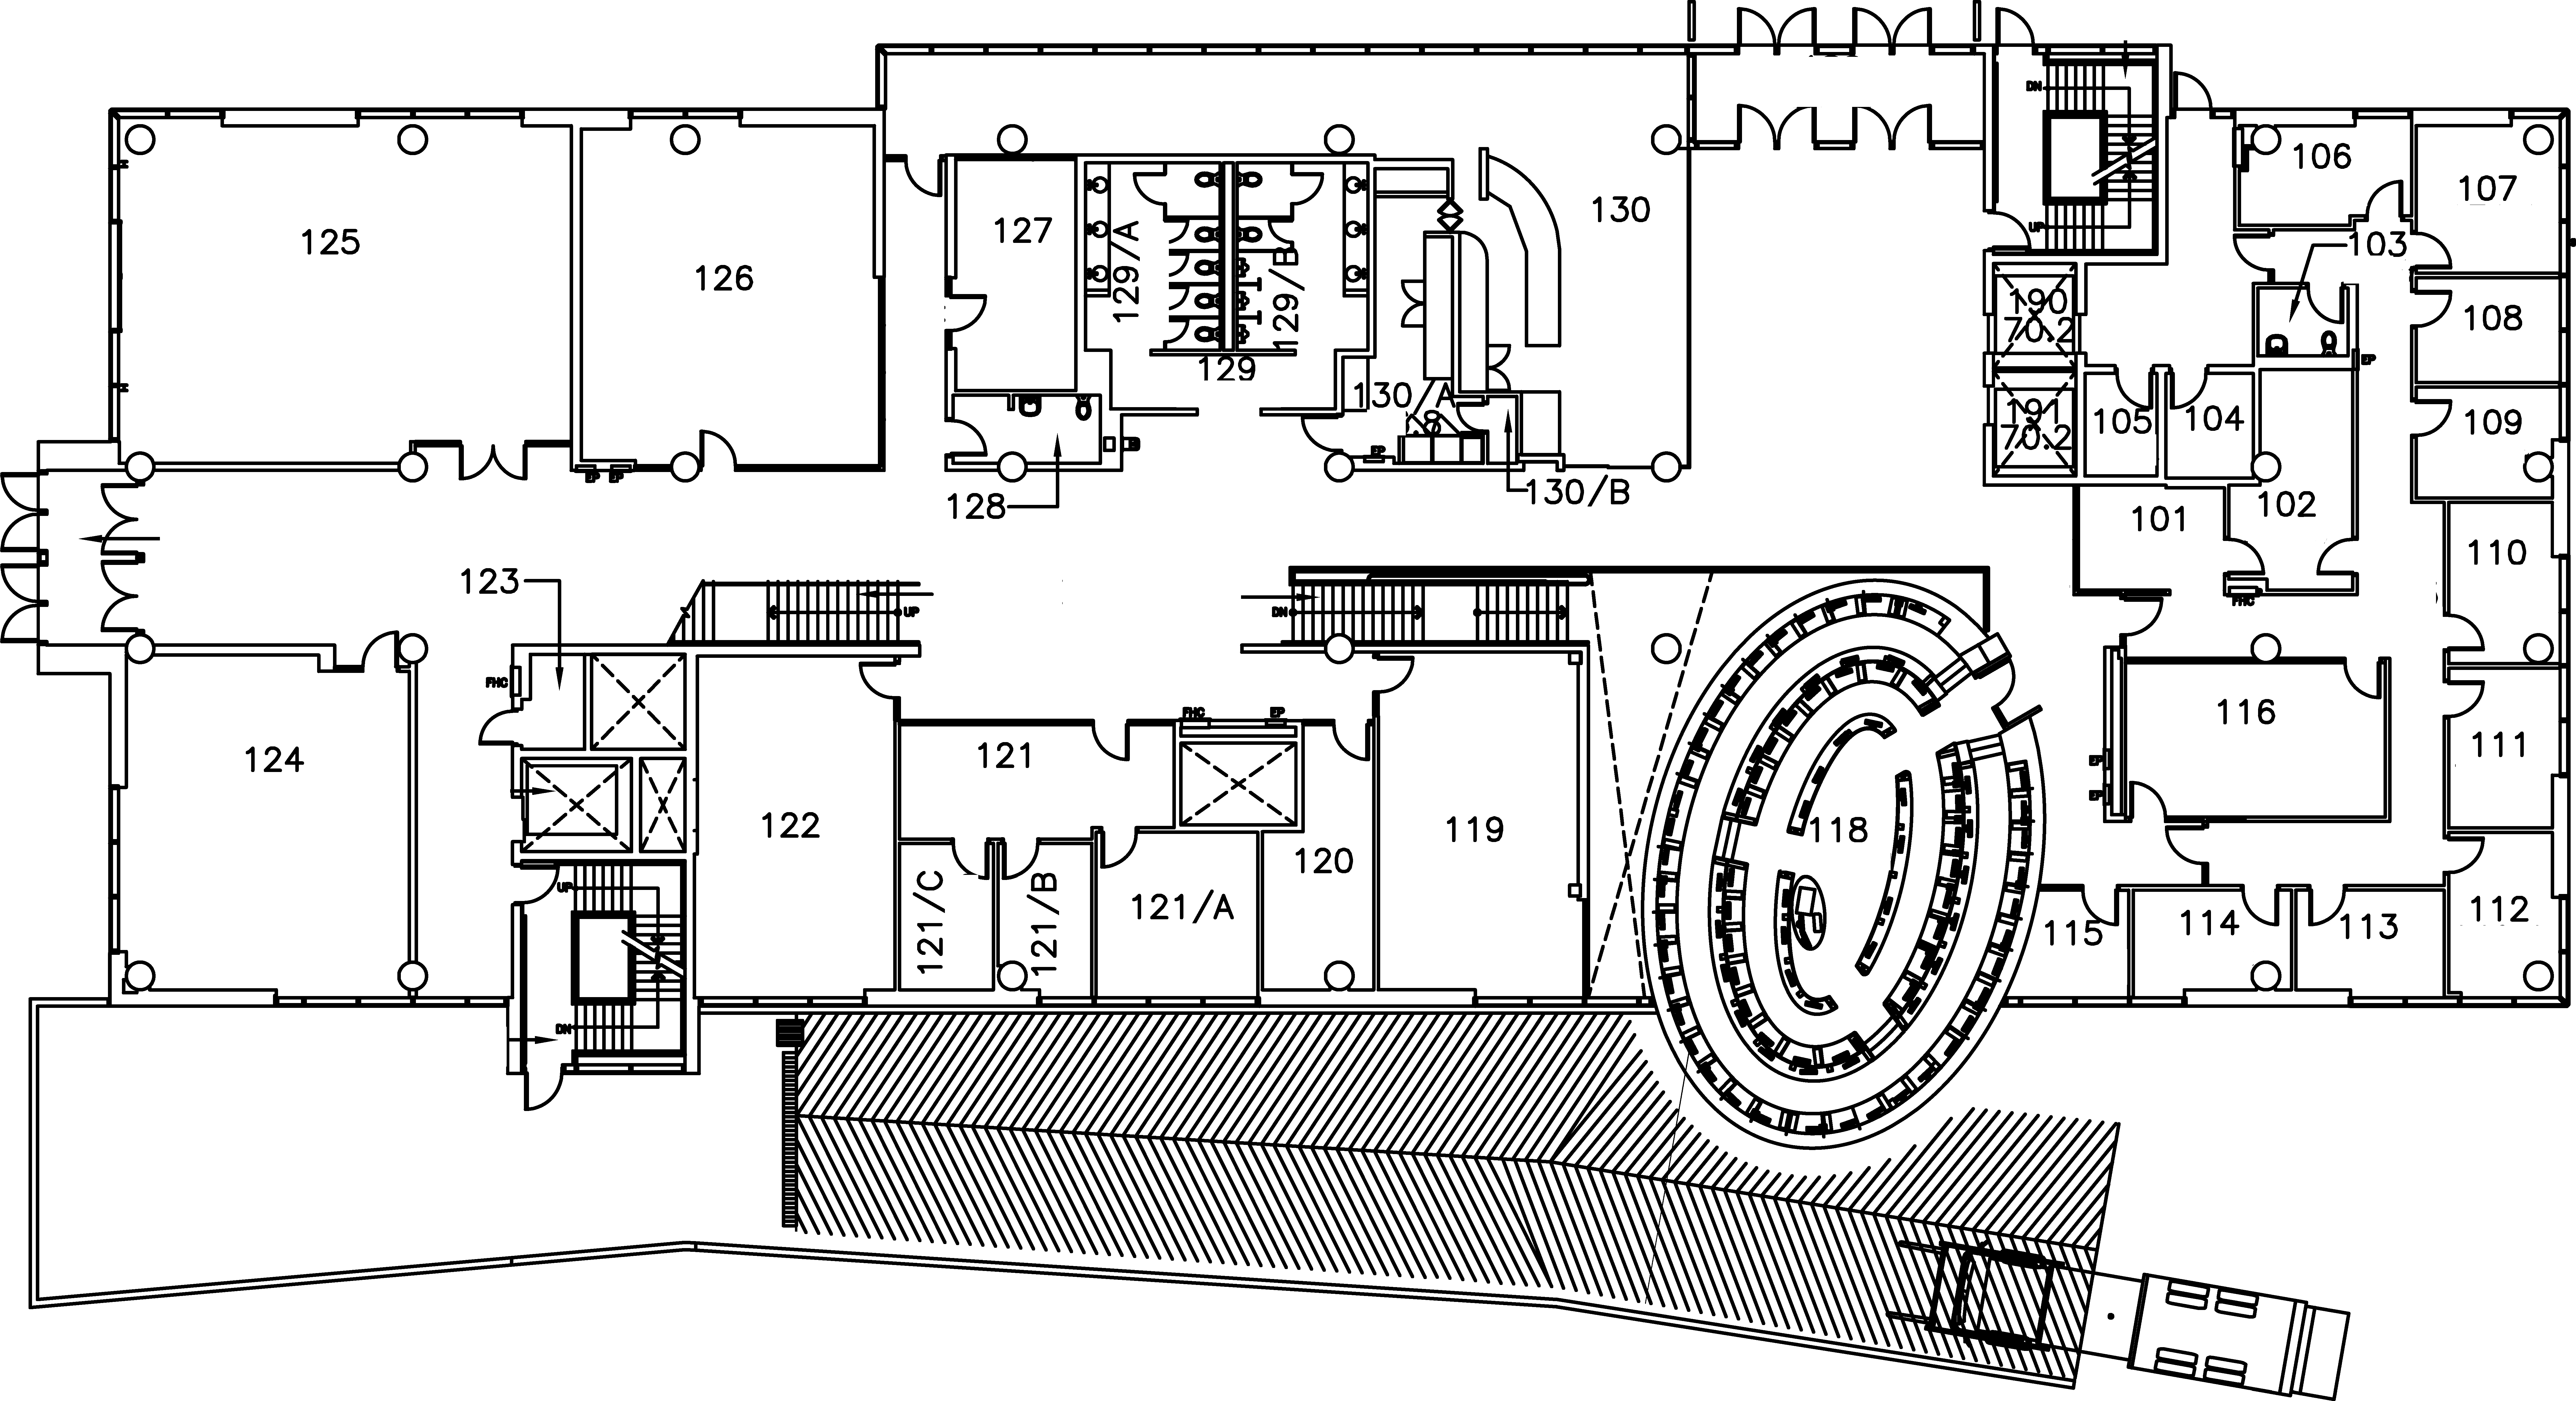 Engineering Technology Building- First Floor Map